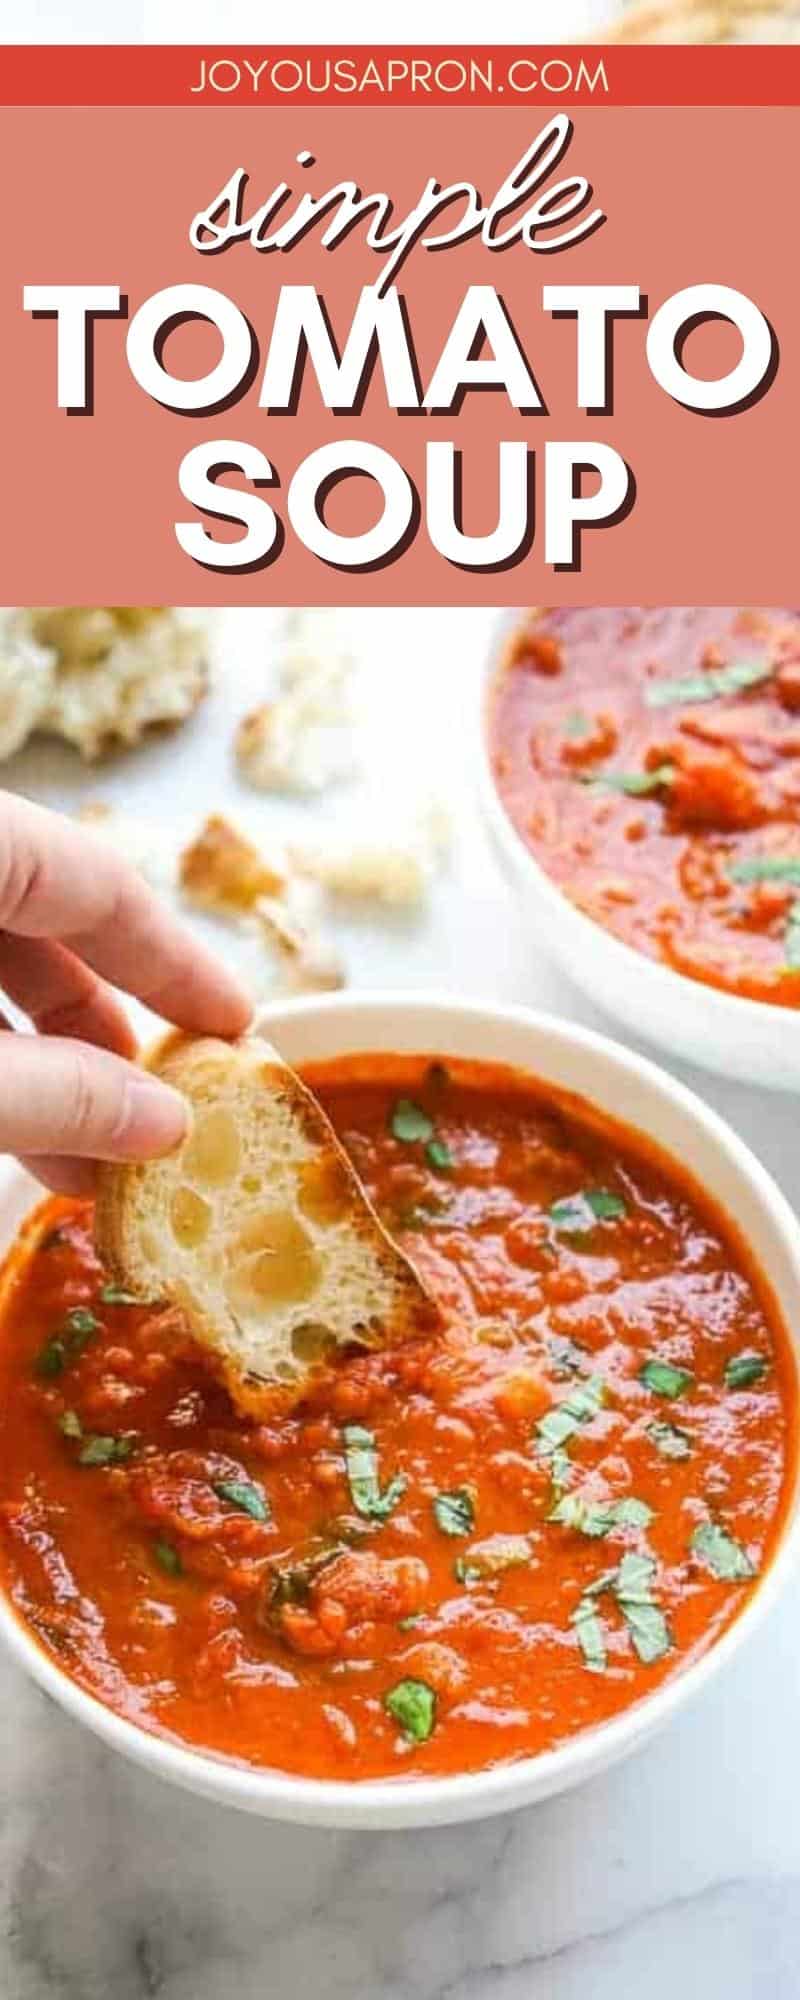 Tomato Soup with Canned Tomatoes (Easy and Vegetarian!) - Joyous Apron